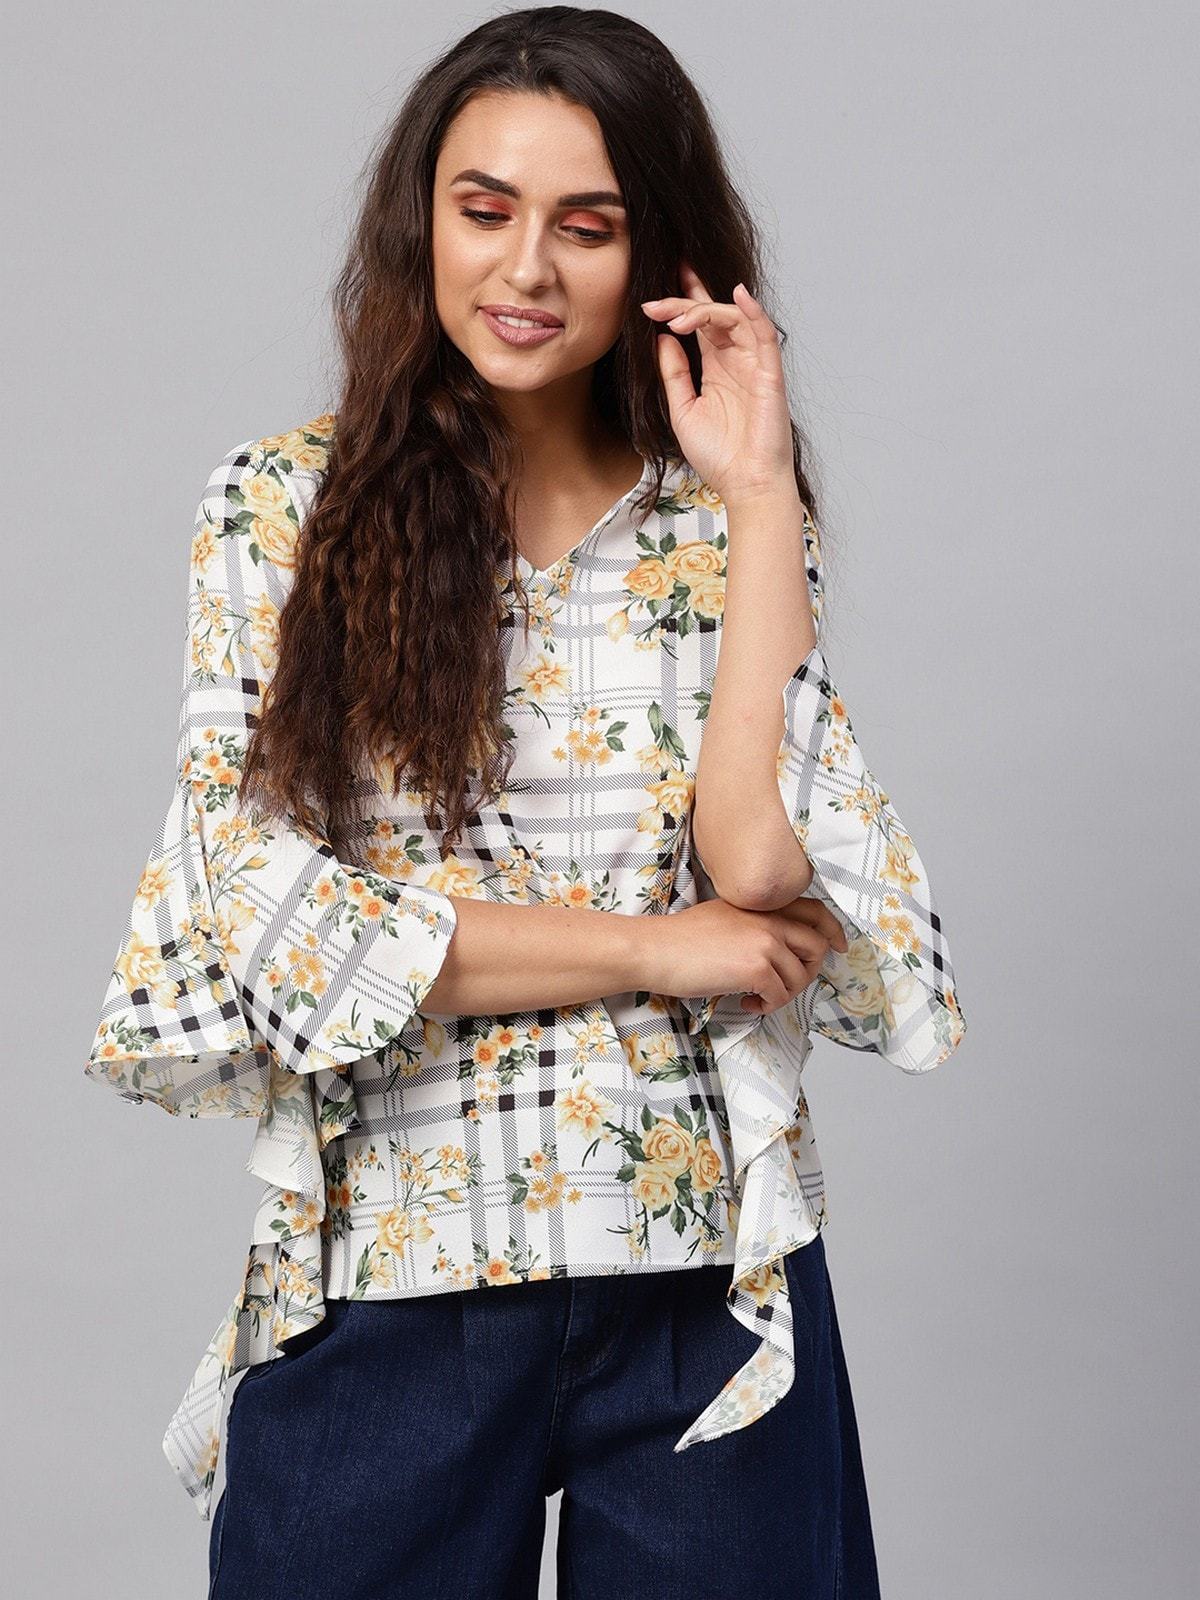 Women's Floral Stripes Printed Flare Sleeves Top - Pannkh